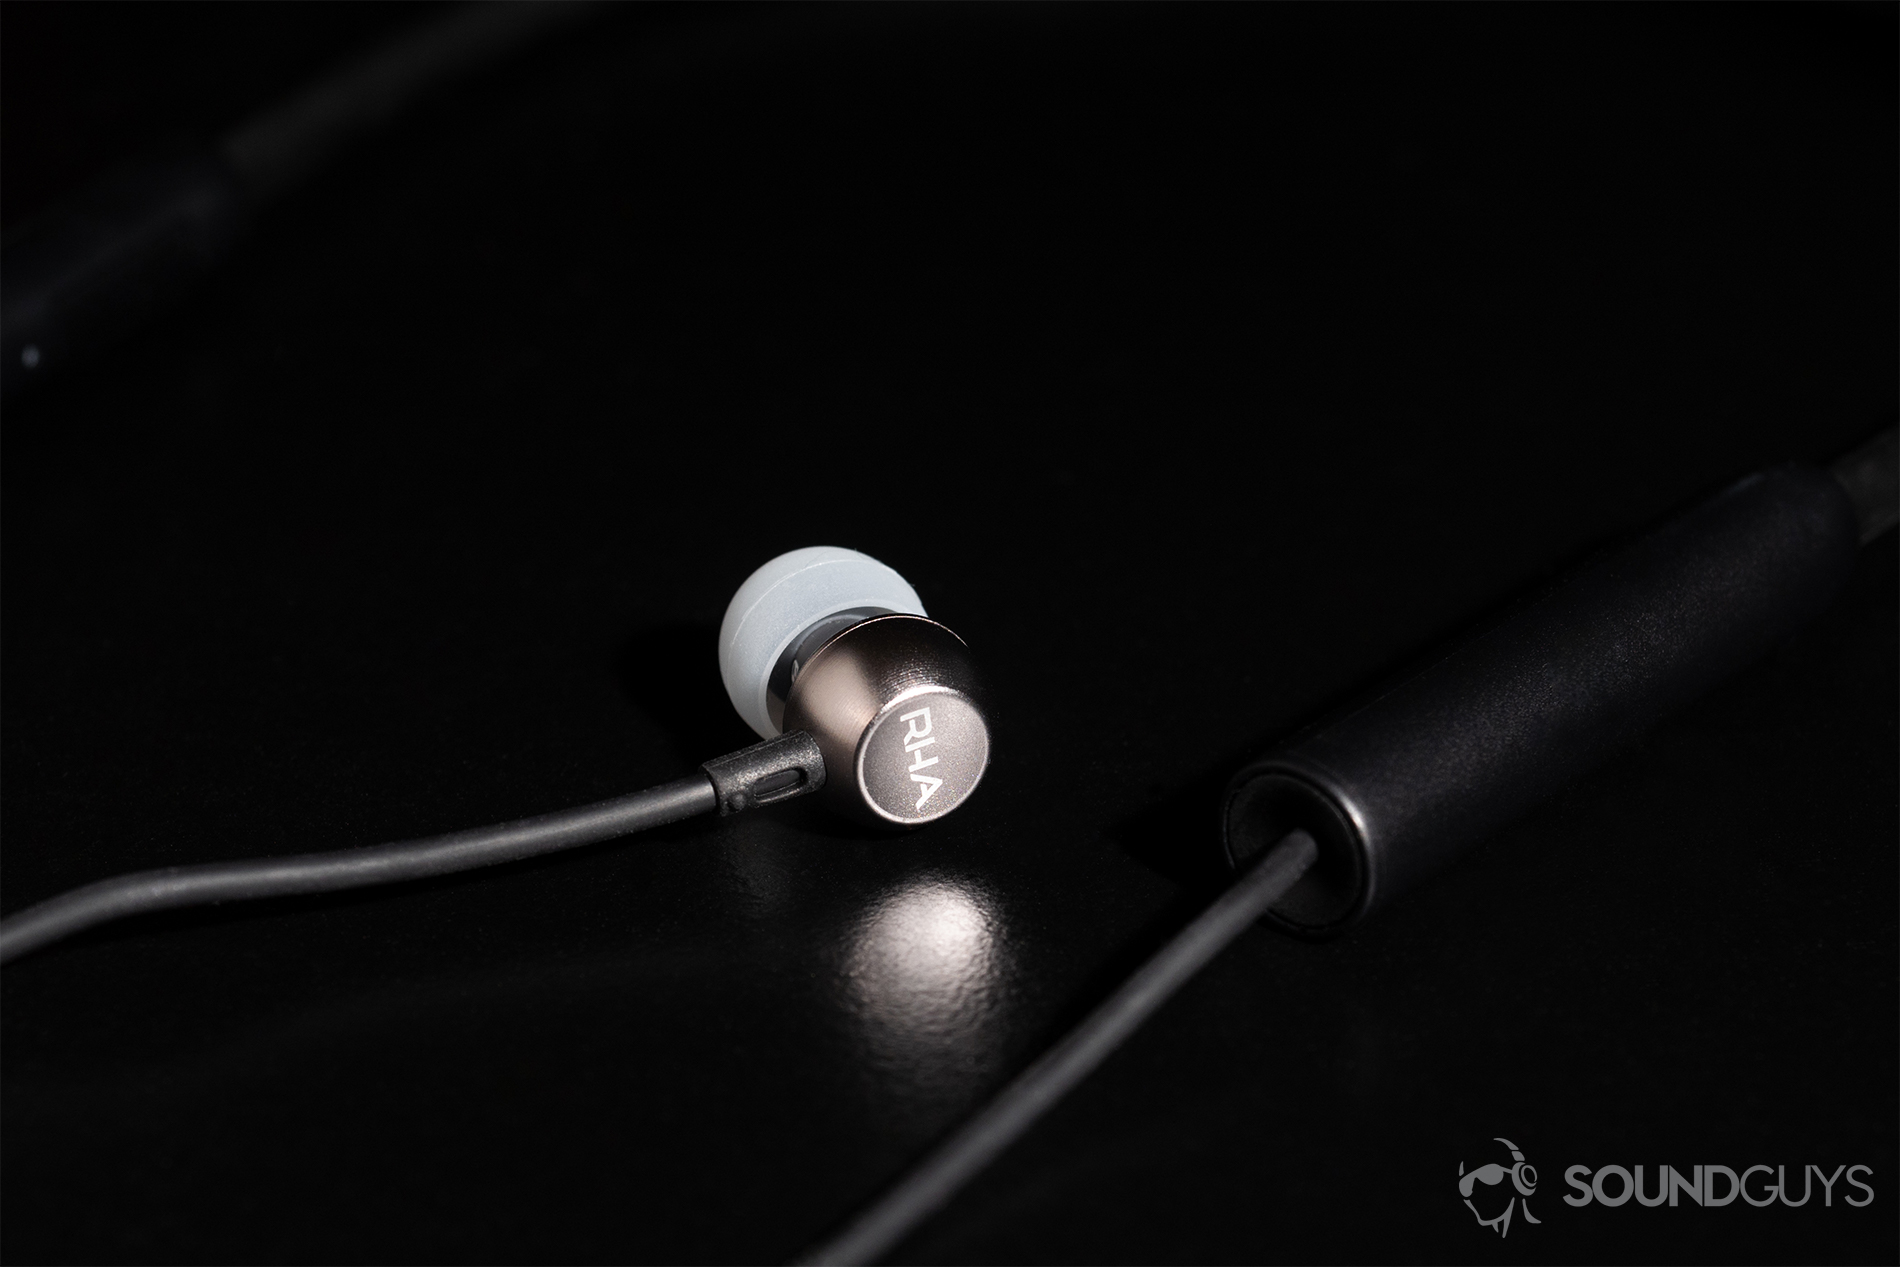 RHA MA390 Wireless: A close-up of one of the earbuds with the RHA logo facing the camera.